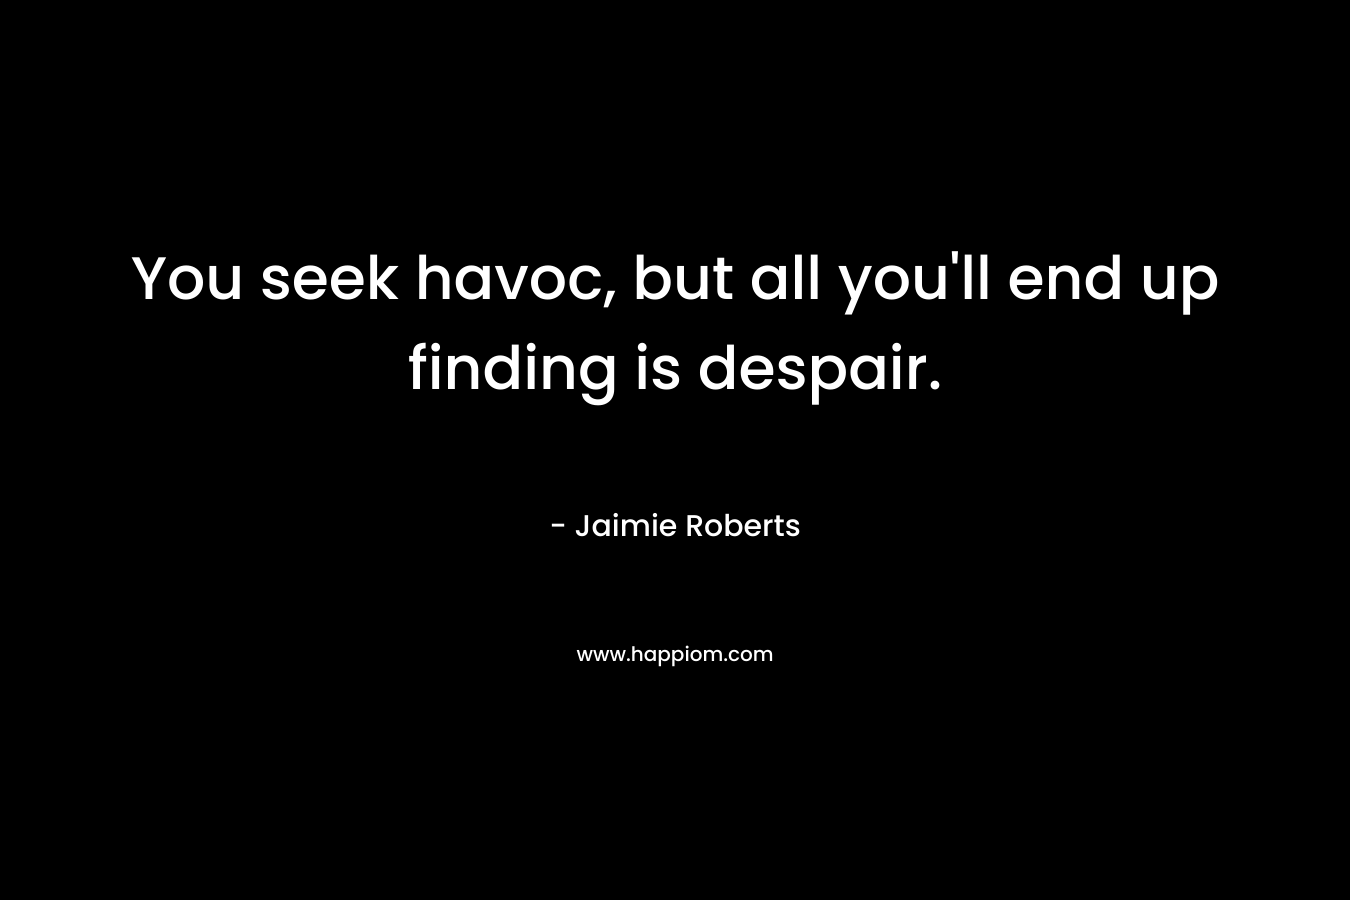 You seek havoc, but all you’ll end up finding is despair. – Jaimie Roberts